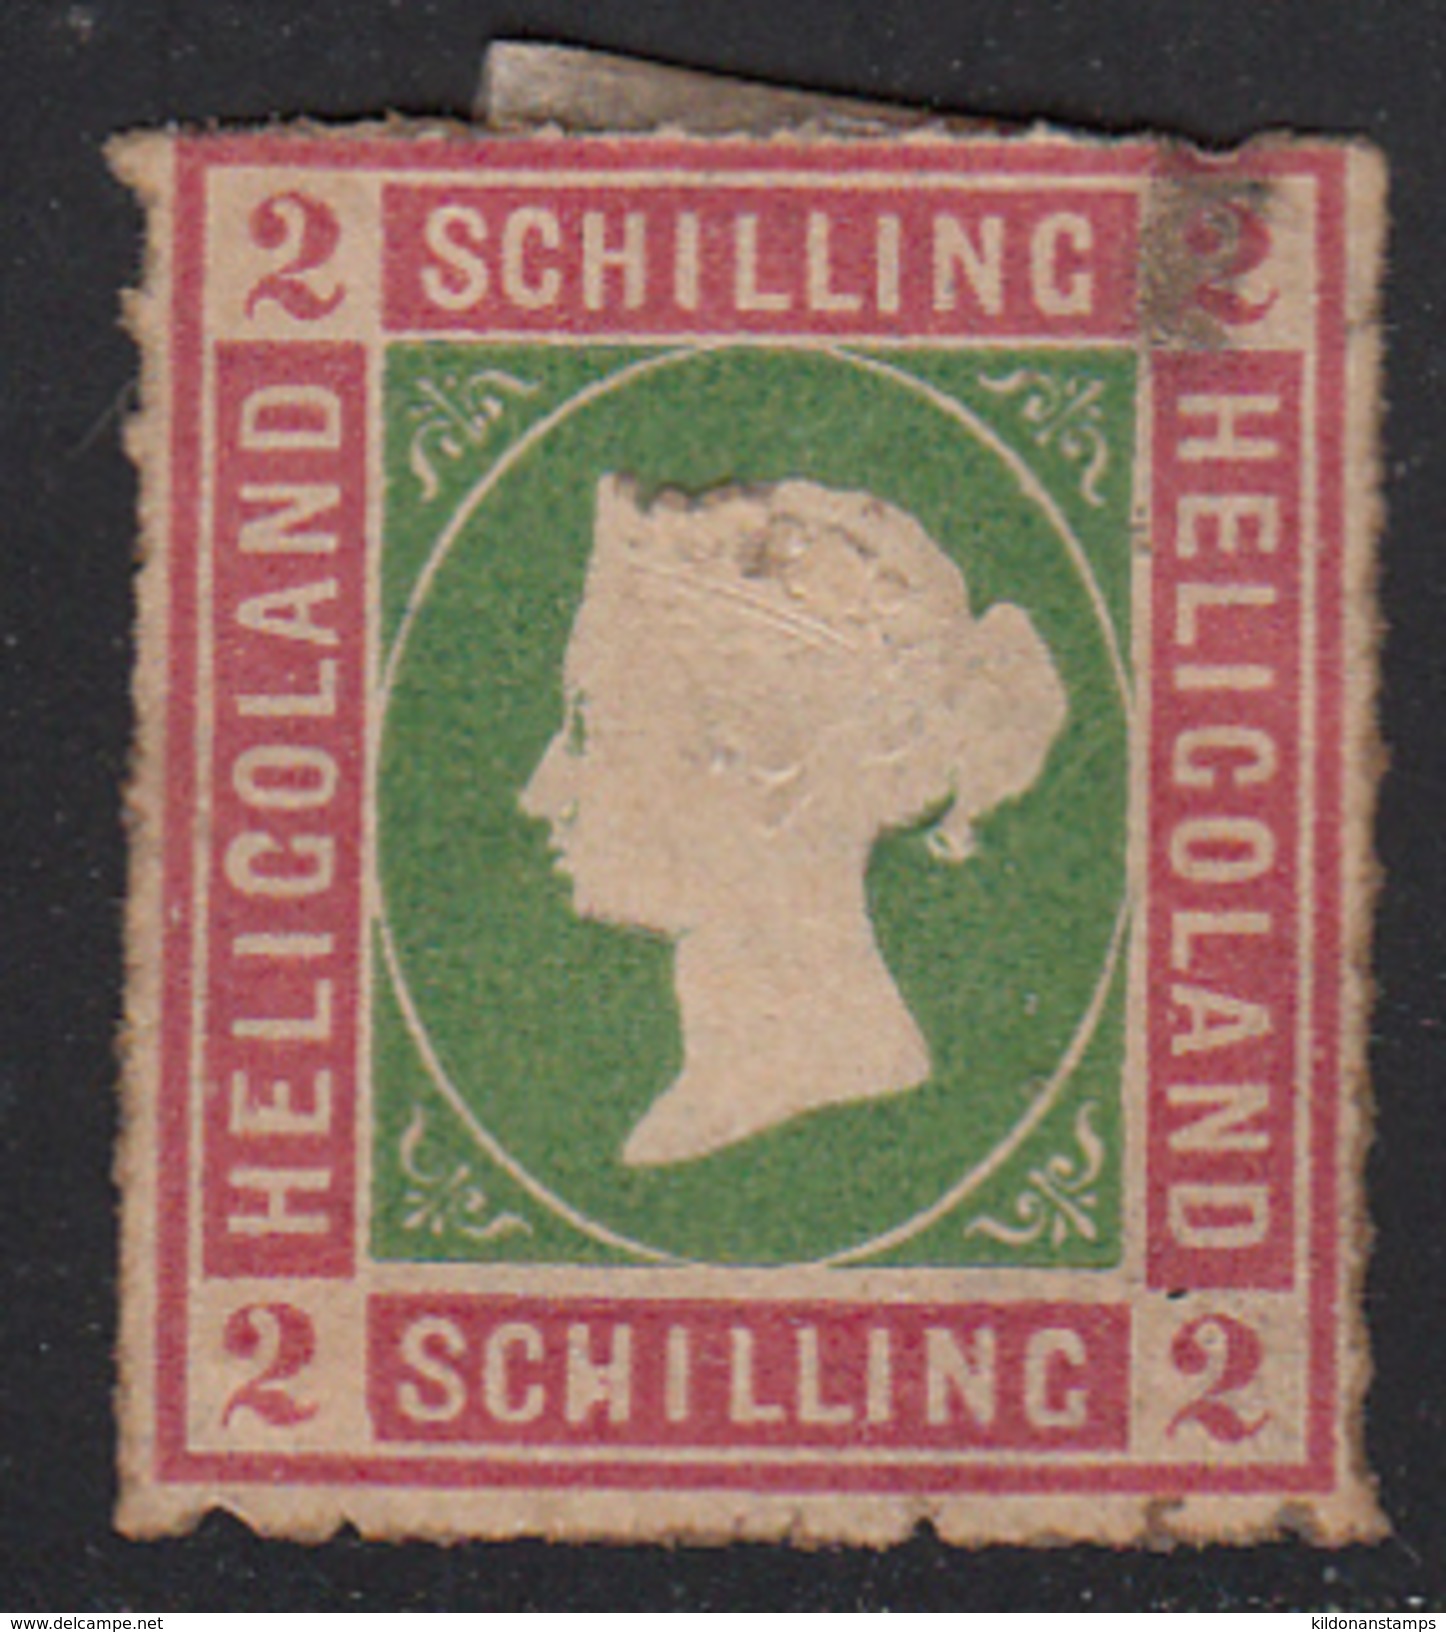 Heligoland 1867-68, Head Die 1, Rouletted, Cancelled, Sc#, SG 3 - Heligoland (1867-1890)